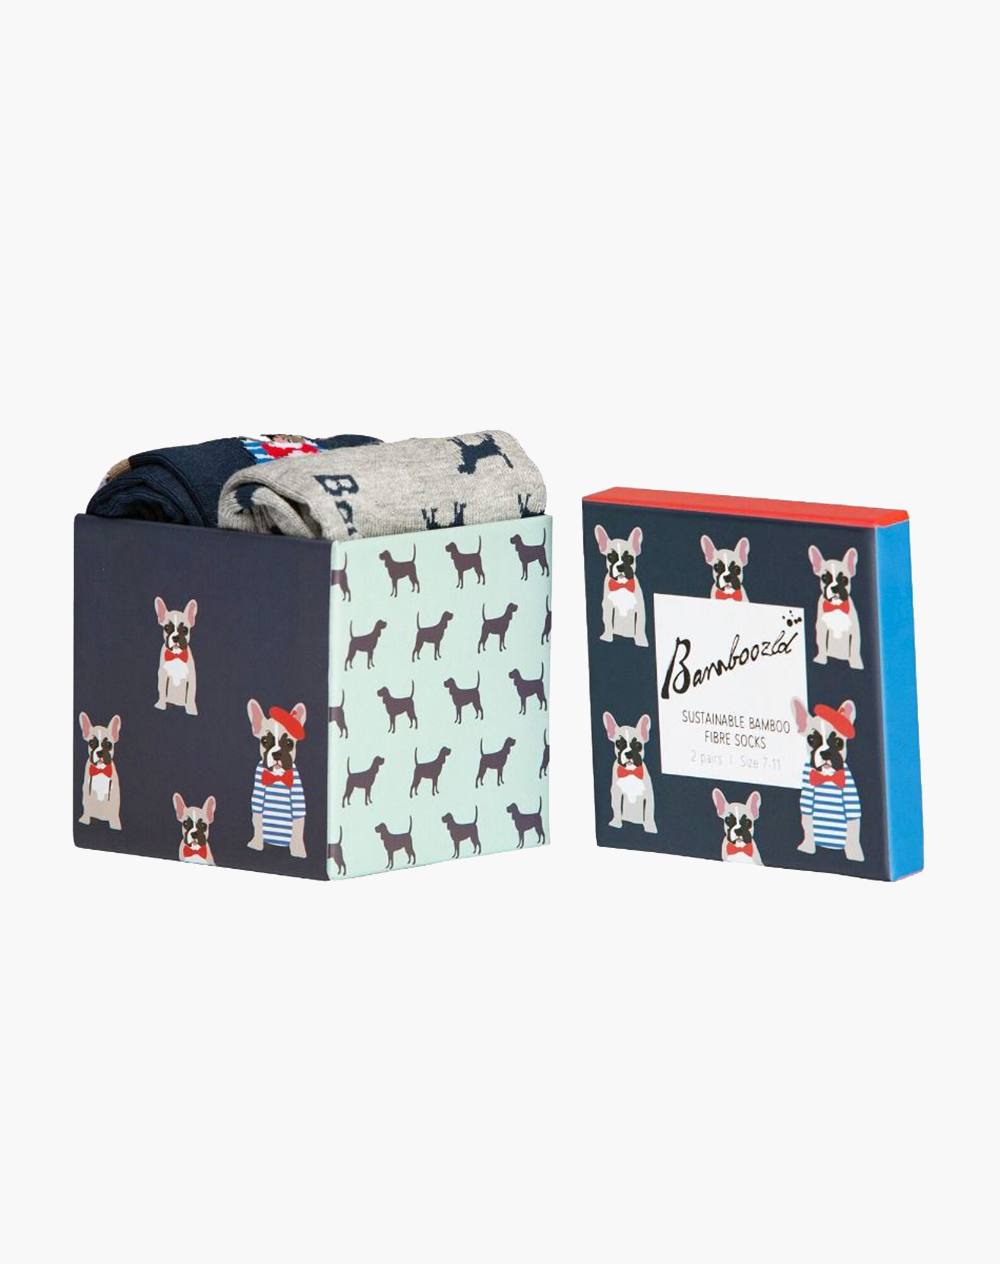 MENS FRENCHY DOGS 2PK GIFT BOX